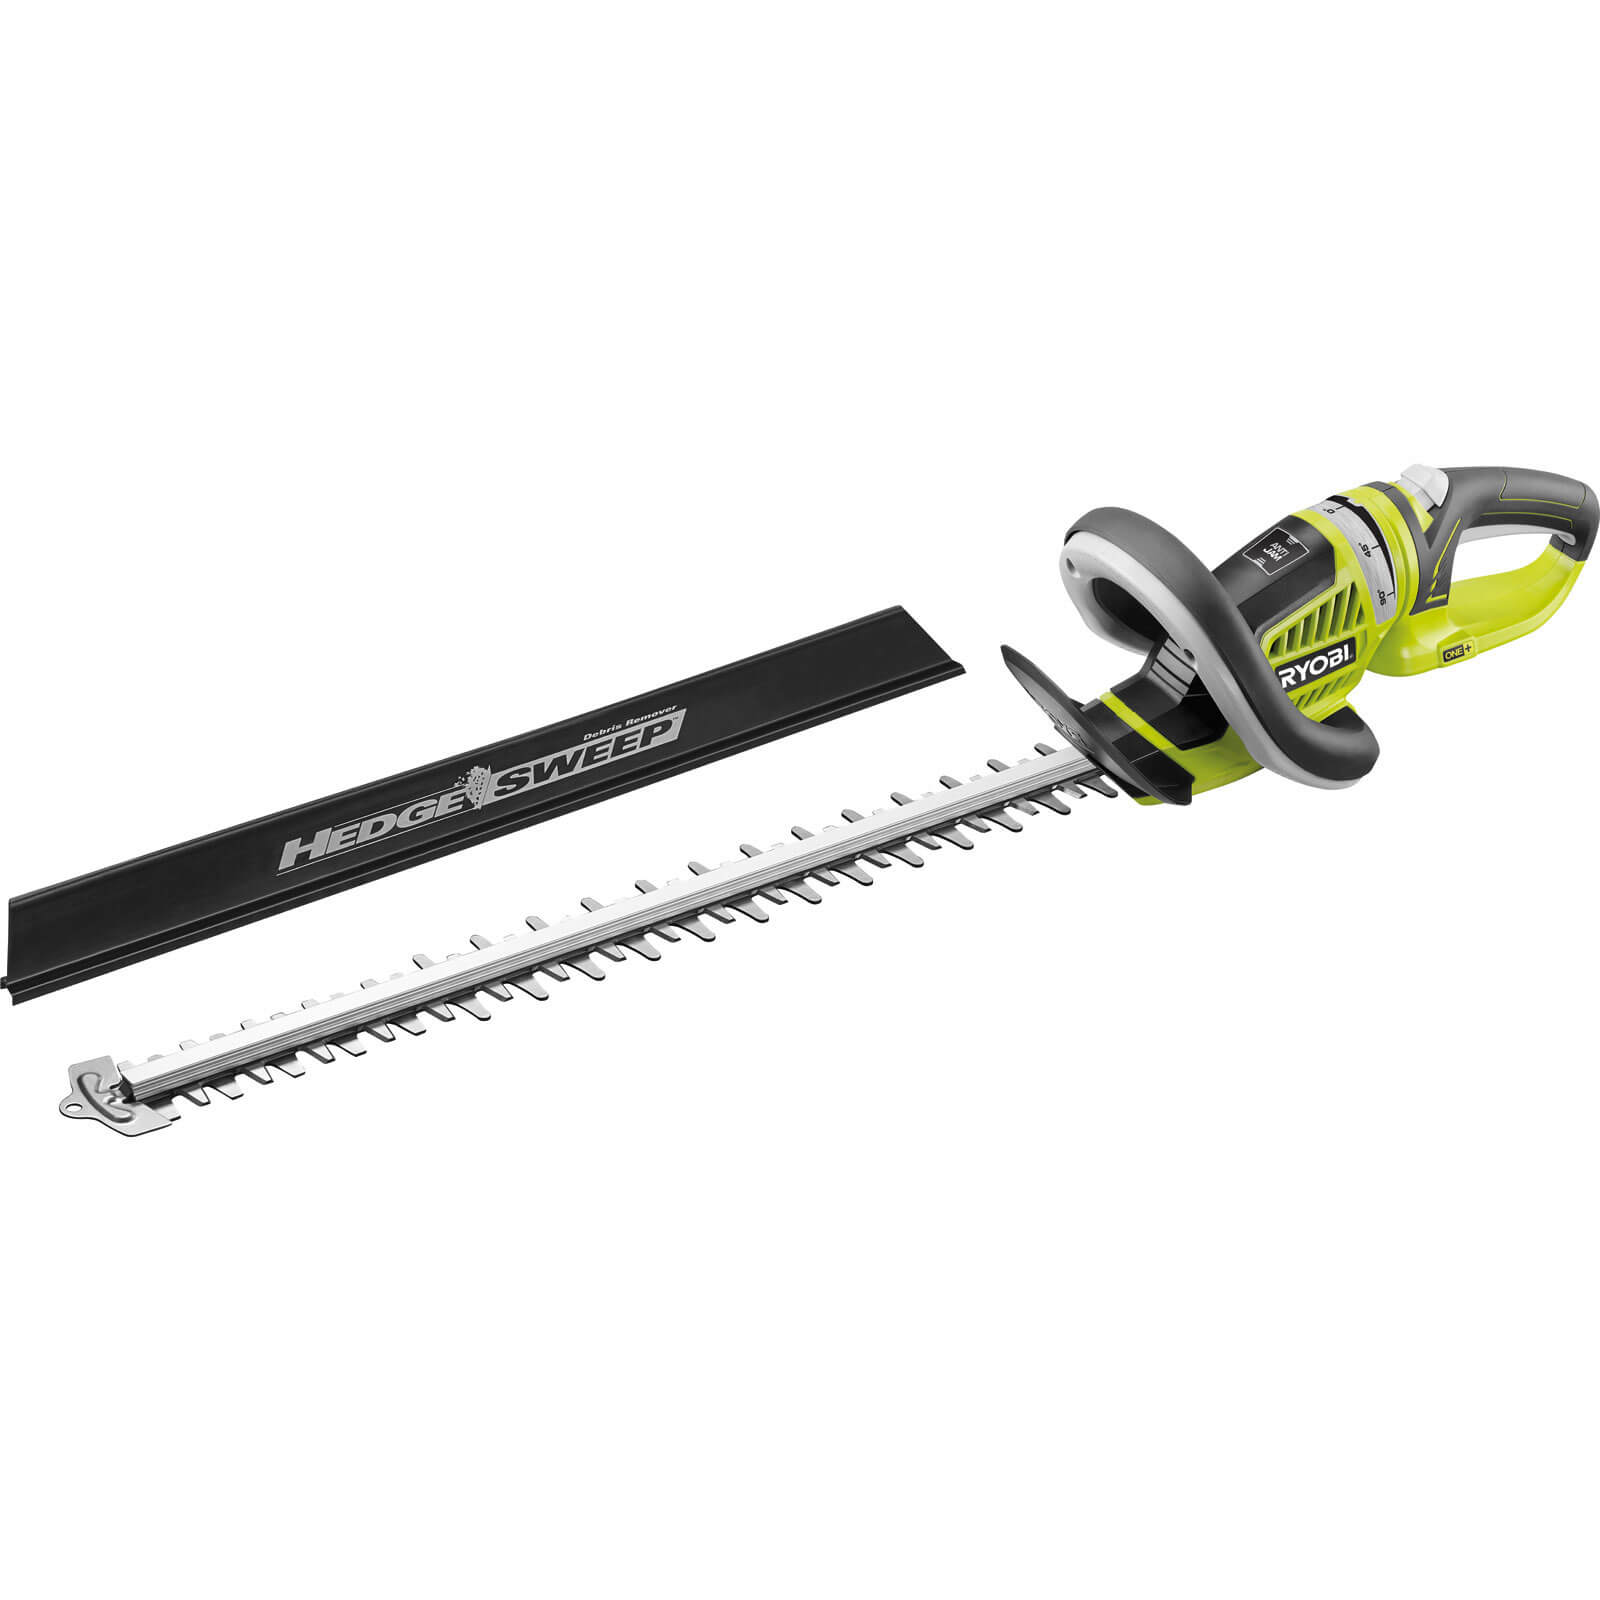 Ryobi OHT1855R ONE+ 18v Cordless Hedge Trimmer 550mm Blade Length without Battery or Charger - Requires ONE+ Battery/Charger